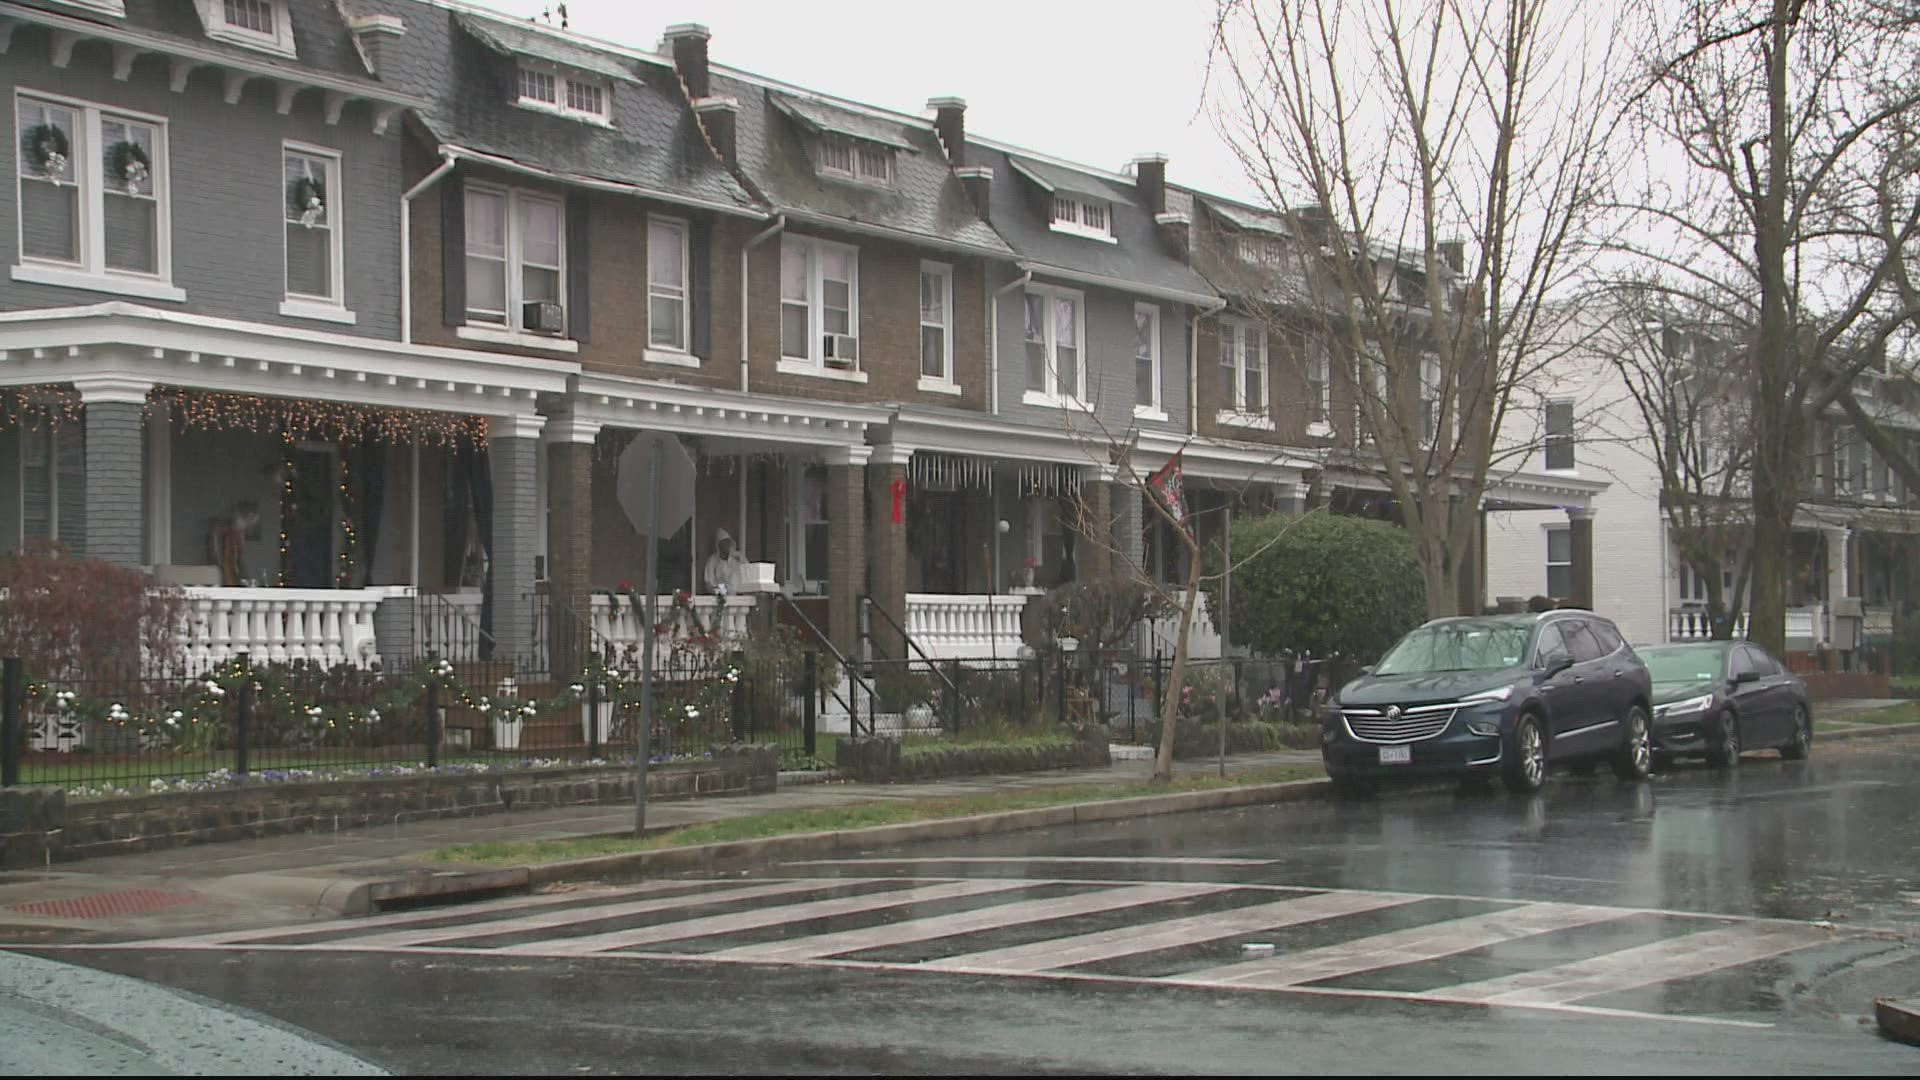 Police are investigating after a brazen burglary in Southeast D.C. Wednesday morning.